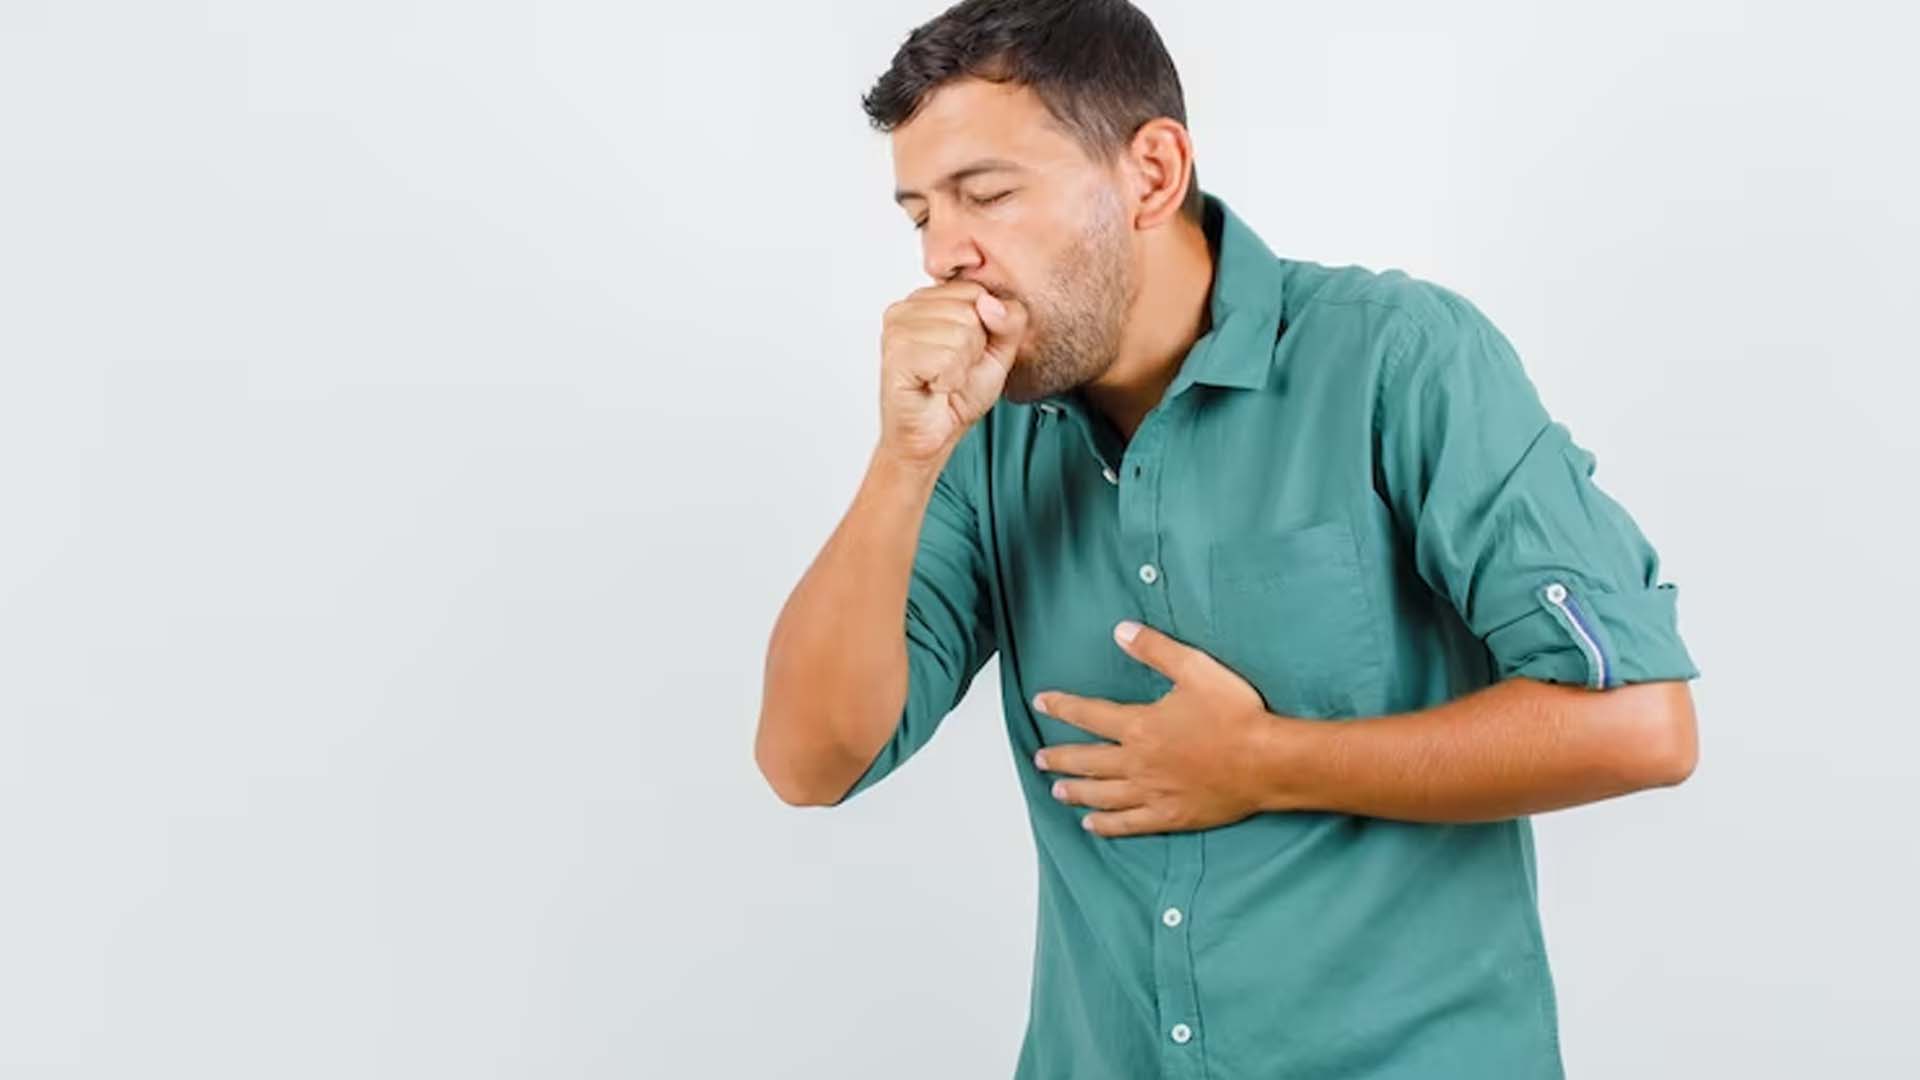 Can Cough Cause Fever?